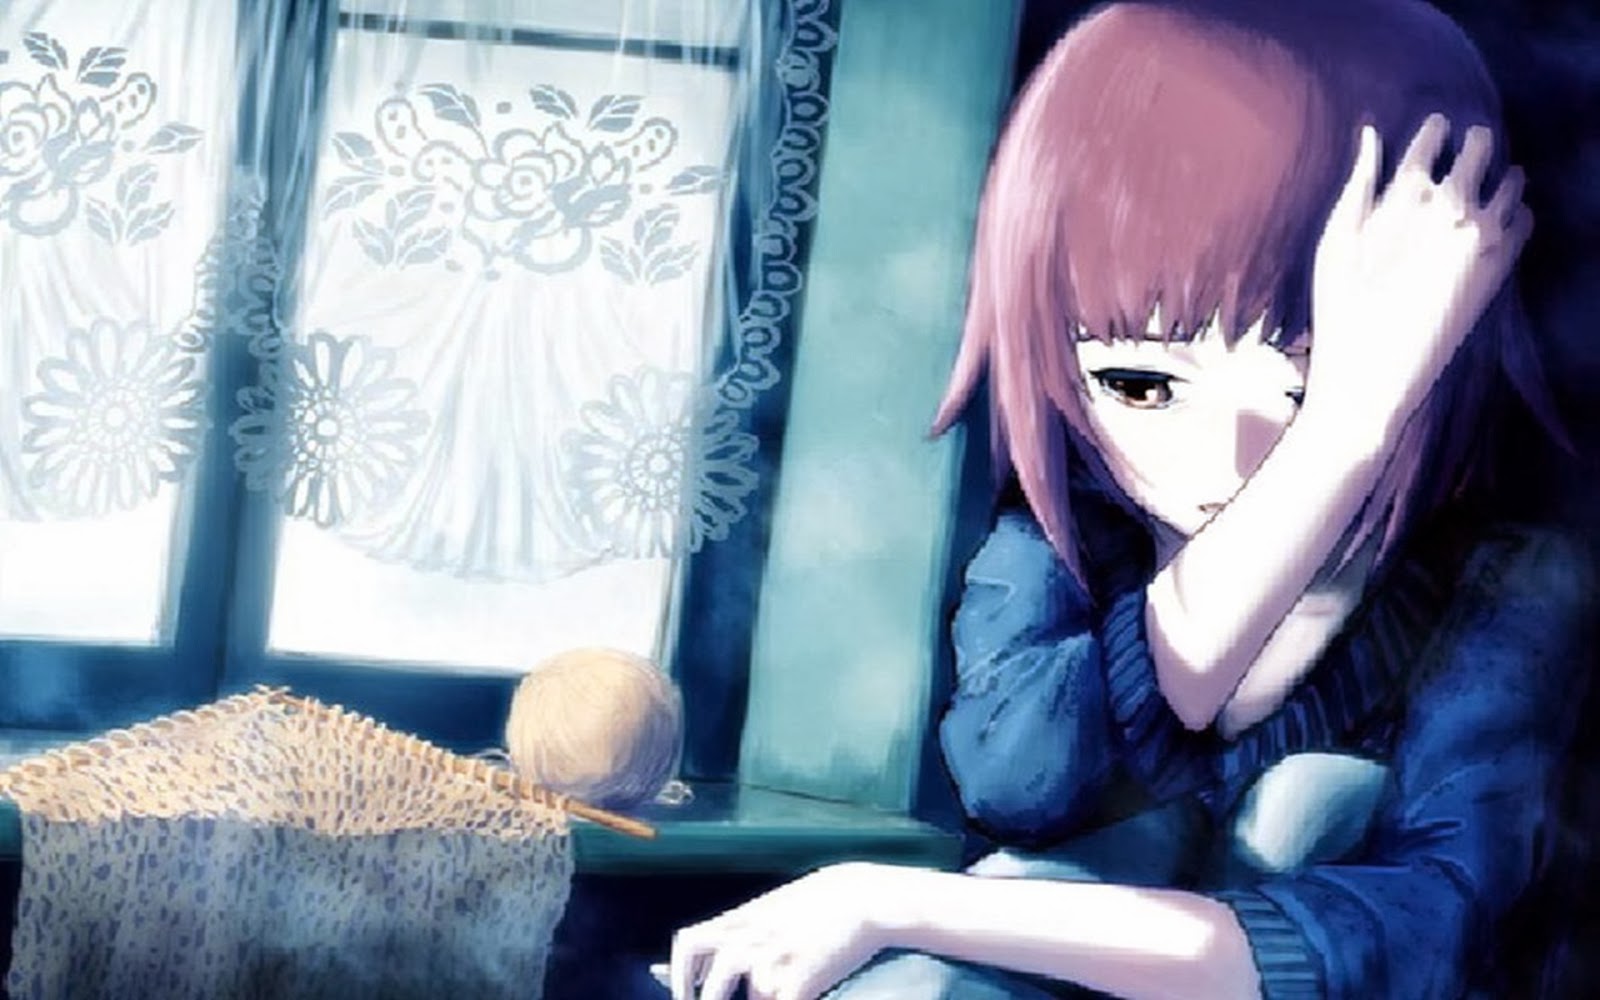  up loader To get more awesome sad anime photo keep visiting our site 1600x1000